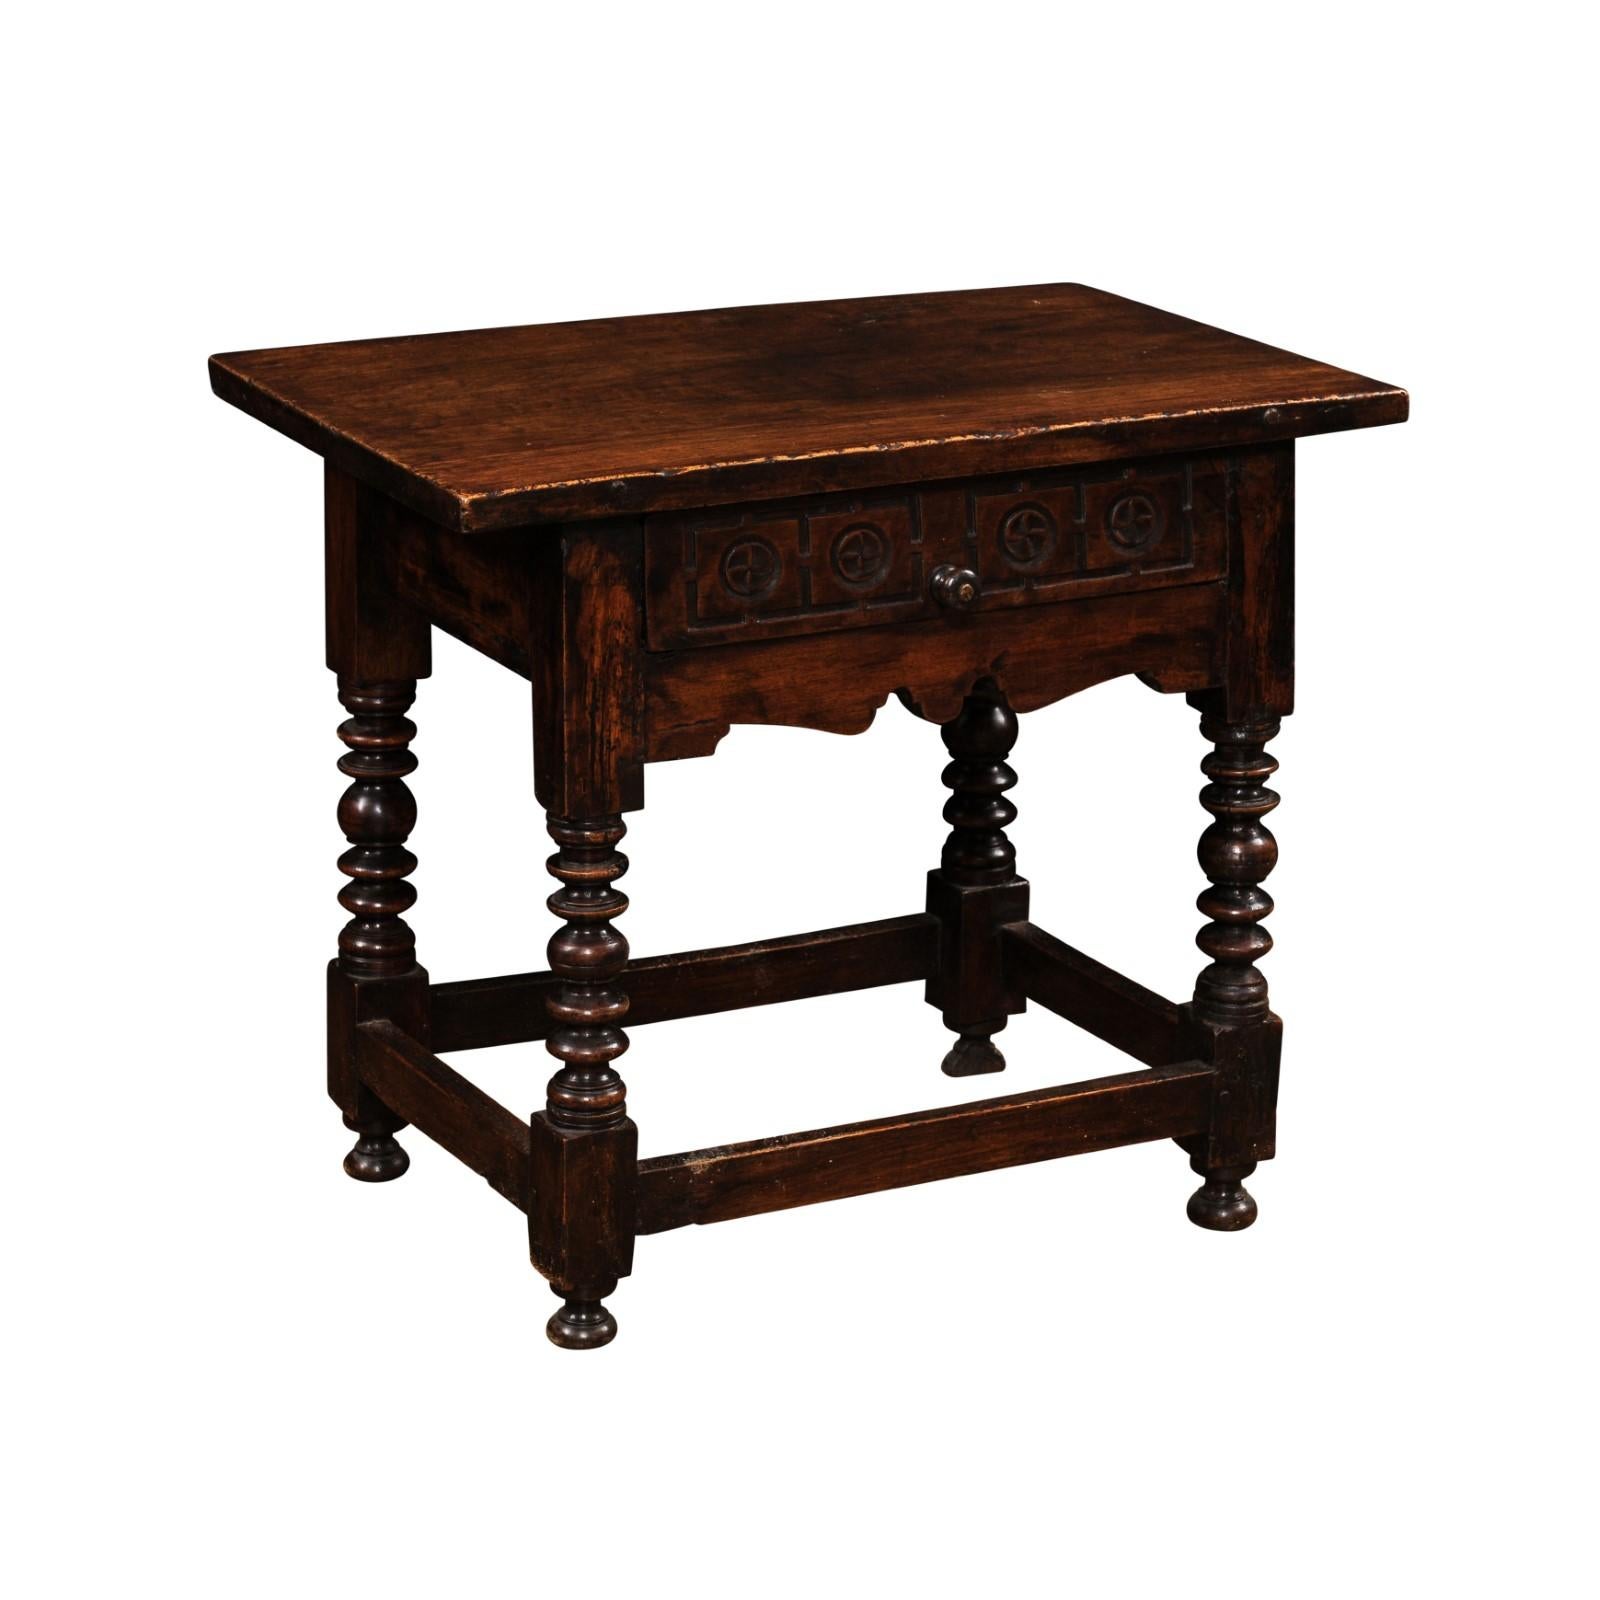 A Spanish spool leg side table from circa 1770 with single dovetail drawer and carved rosettes. This Spanish spool leg side table, hailing from circa 1770, is a remarkable piece of antique furniture that combines utility with historical charm.